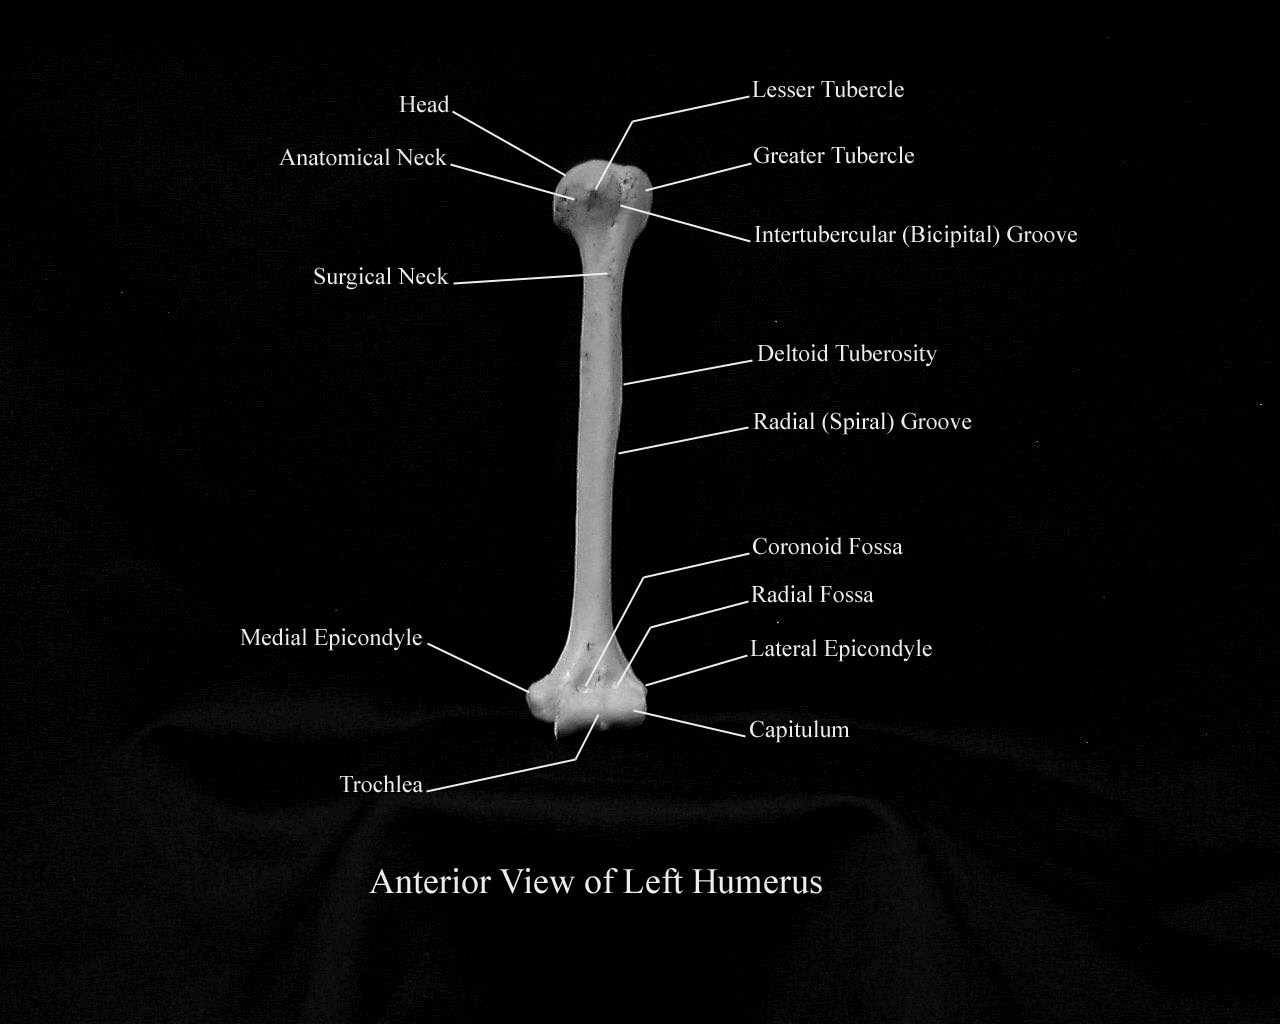 a picture of an anterior view of a humerus with the structures labeled